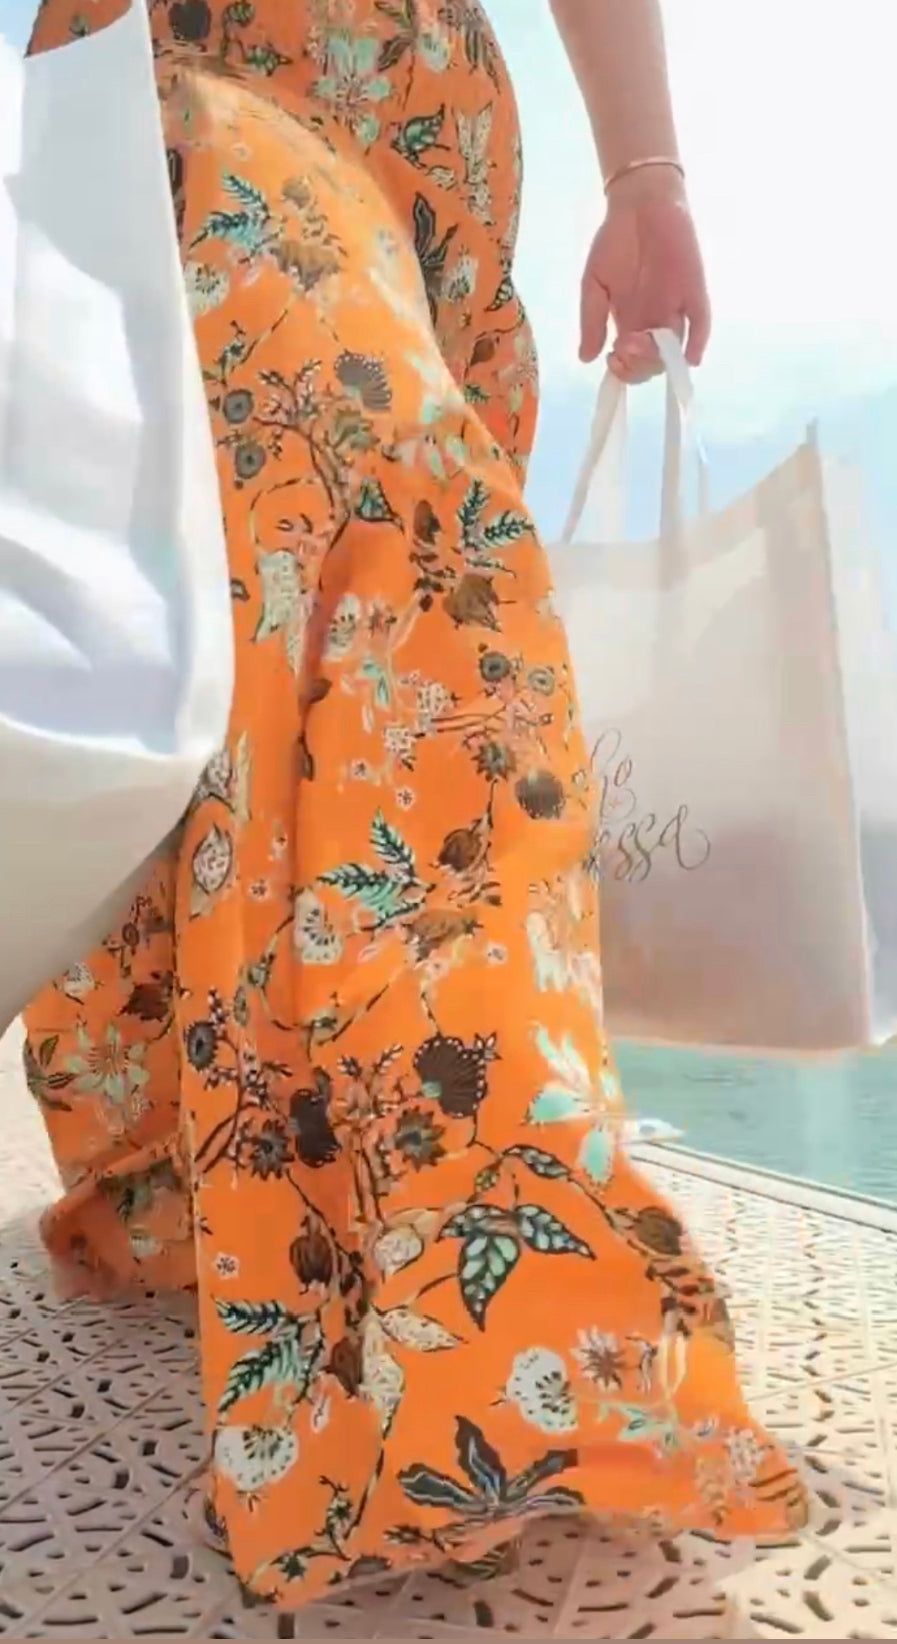 Sunsets in paradise butterfly dress/skirt